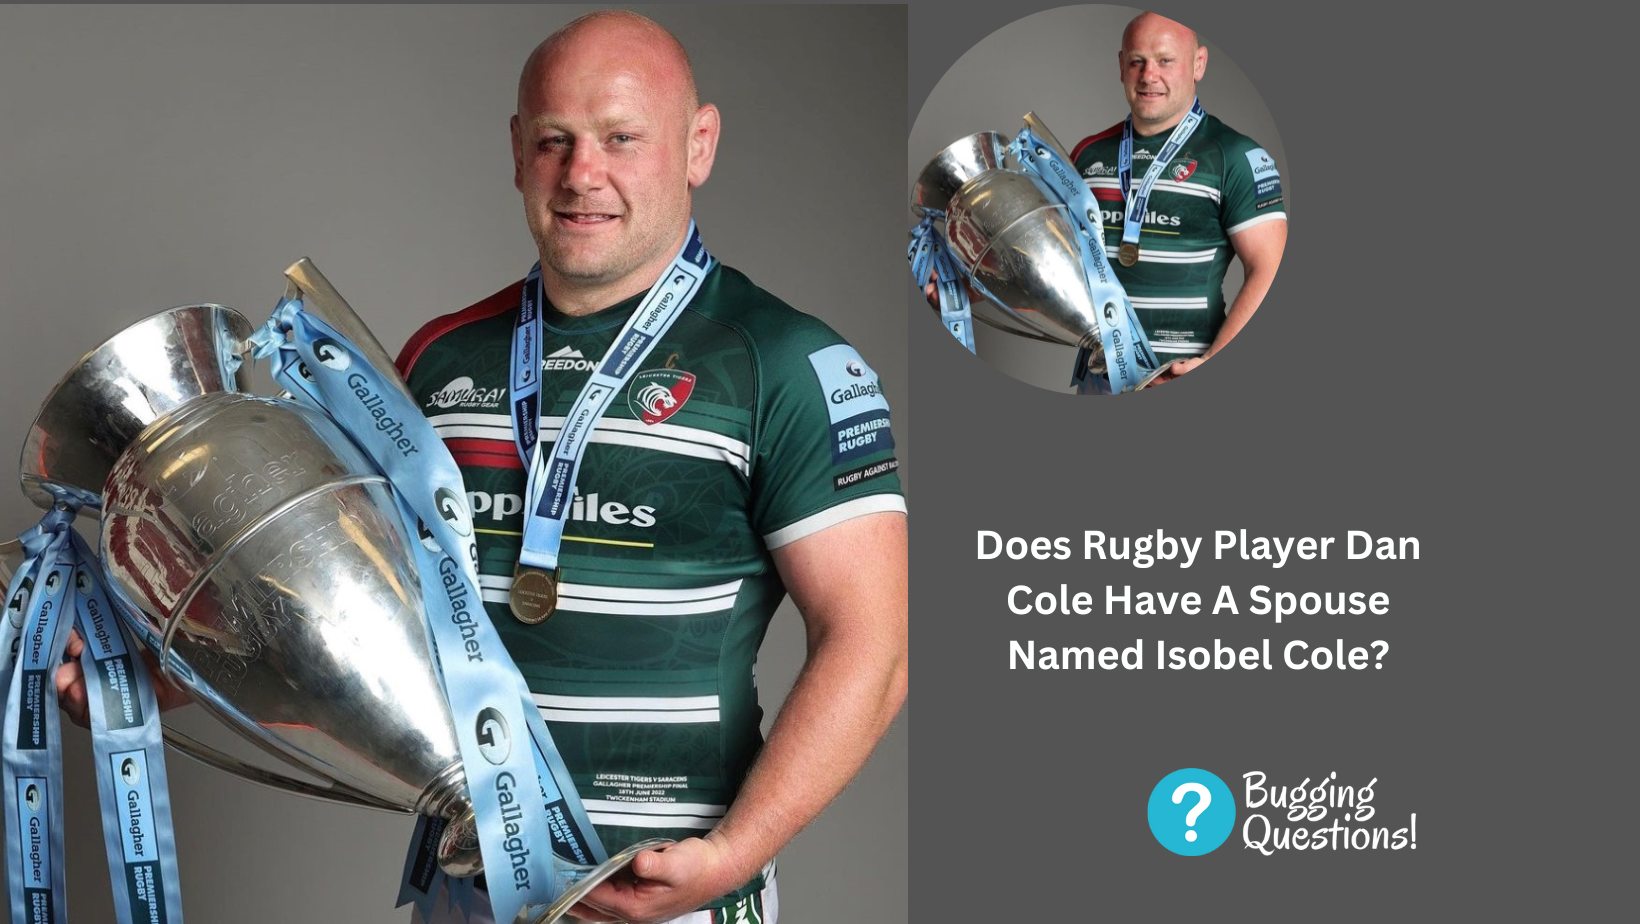 Does Rugby Player Dan Cole Have A Spouse Named Isobel Cole?